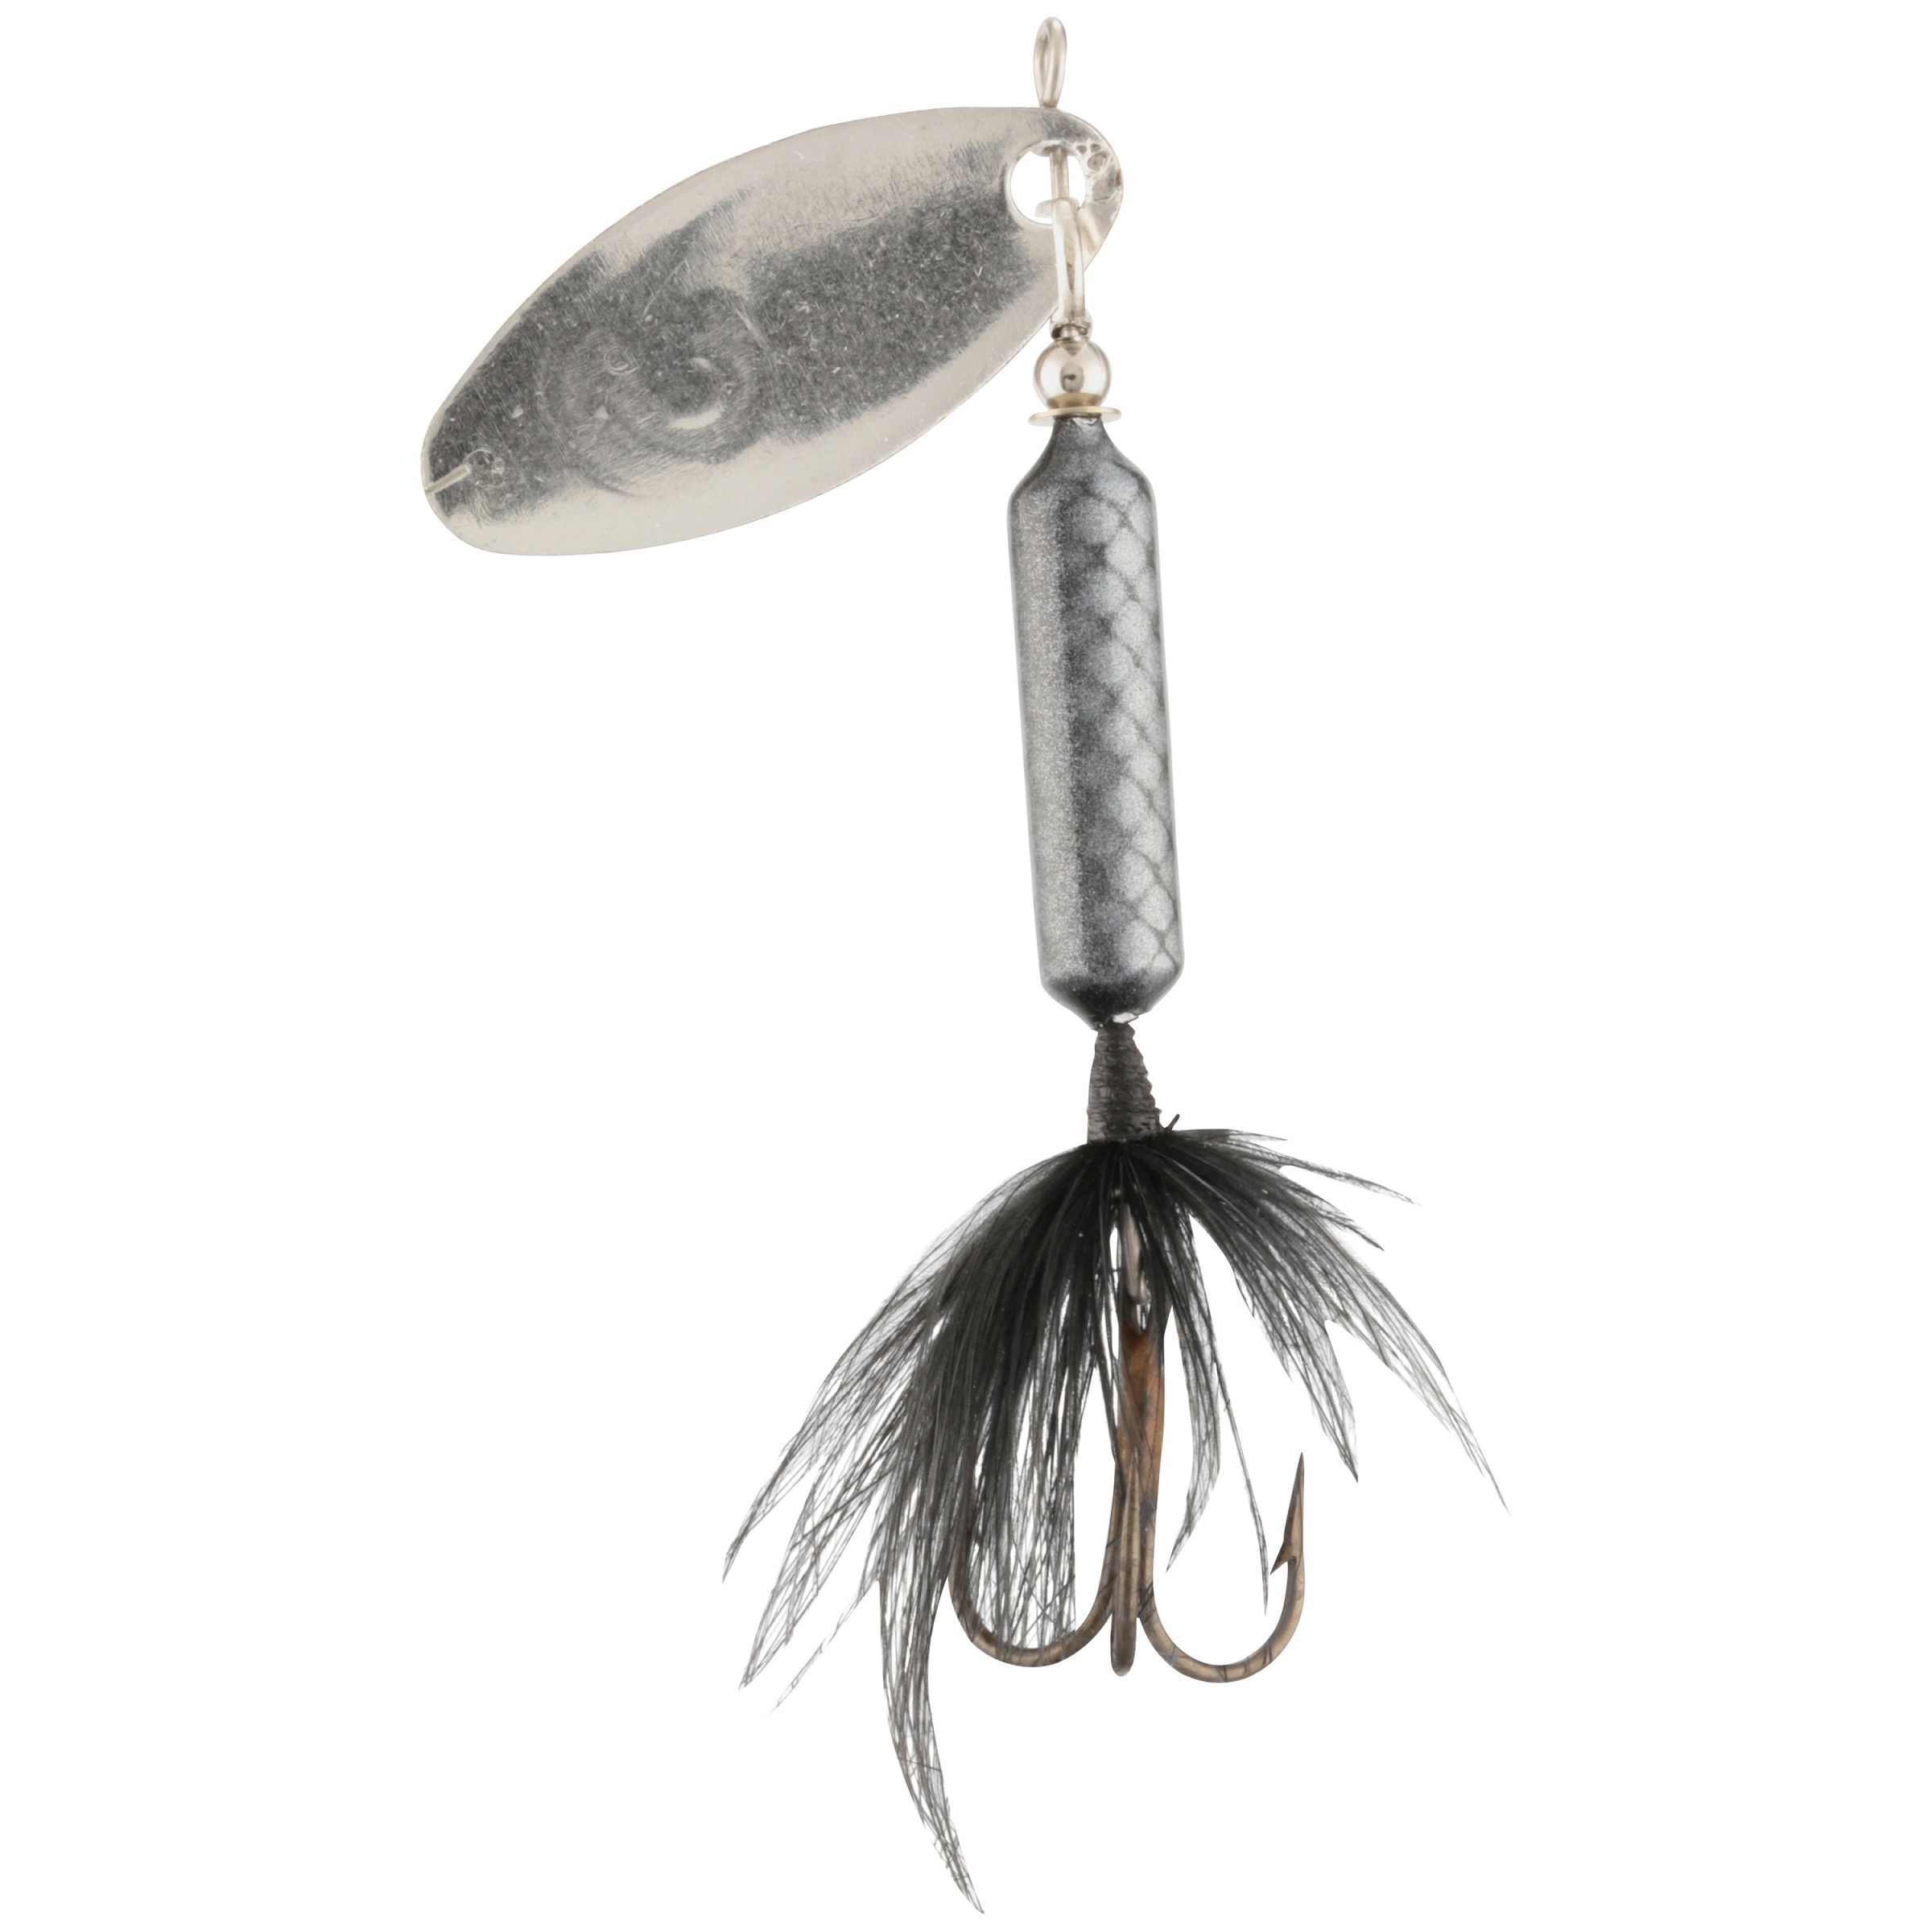 Worden's® Original Black Rooster Tail®, Inline Spinnerbait Fishing Lure, 1/6 oz Carded Pack - image 3 of 4